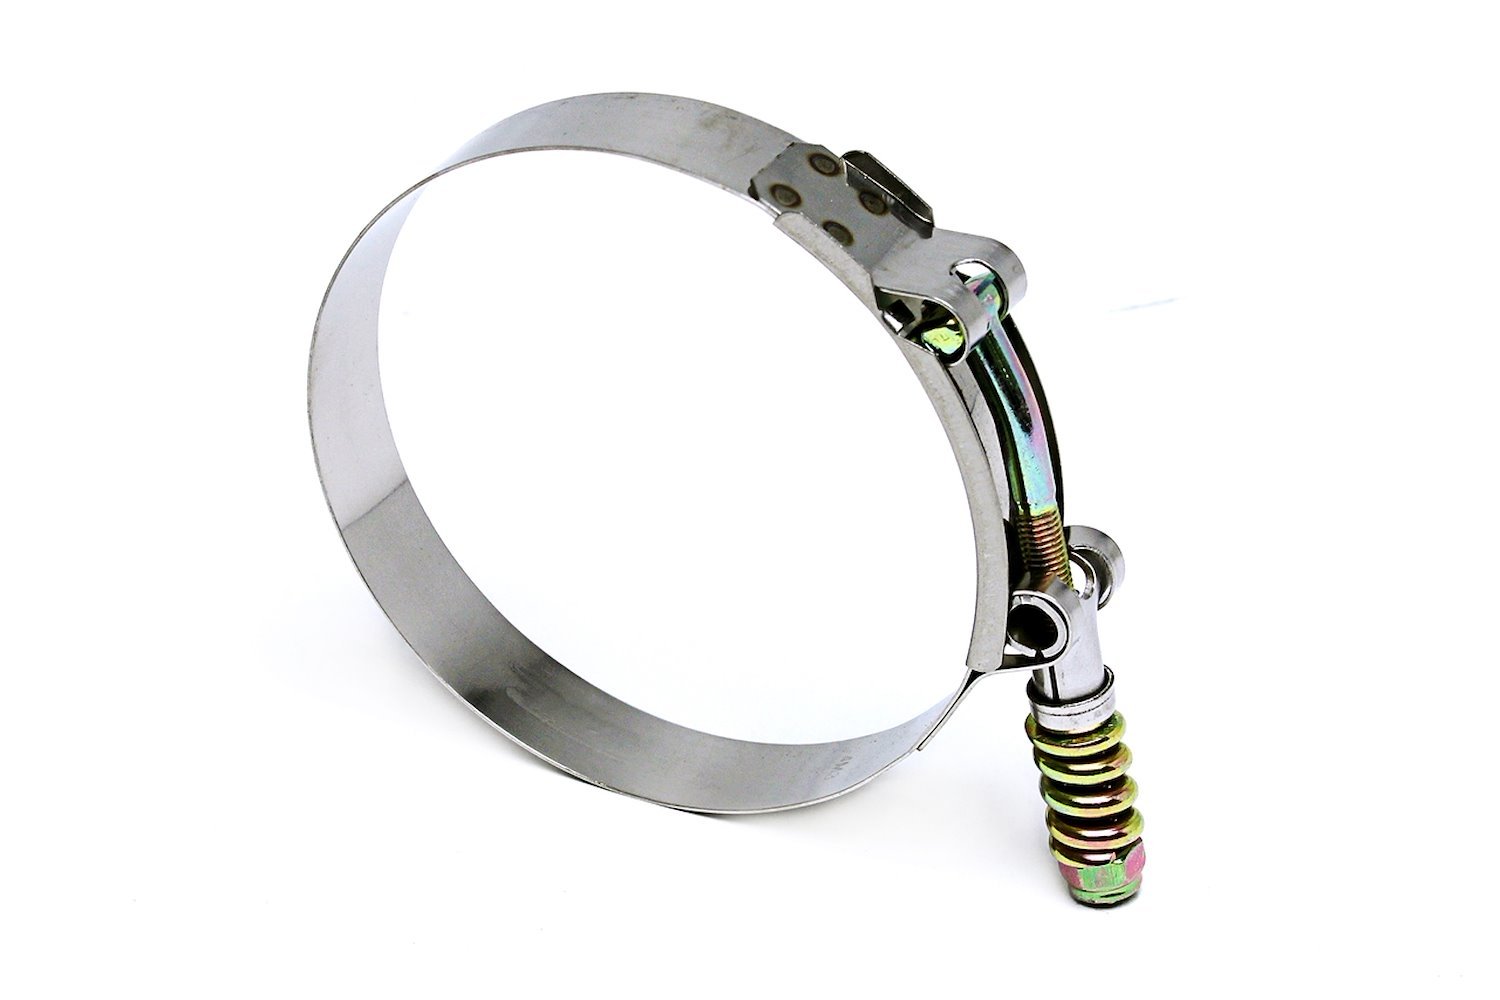 SLTC-375 Stainless Steel Spring Loaded T-Bolt Hose Clamp, Size #92, Range: 3.75 in.-4.06 in.